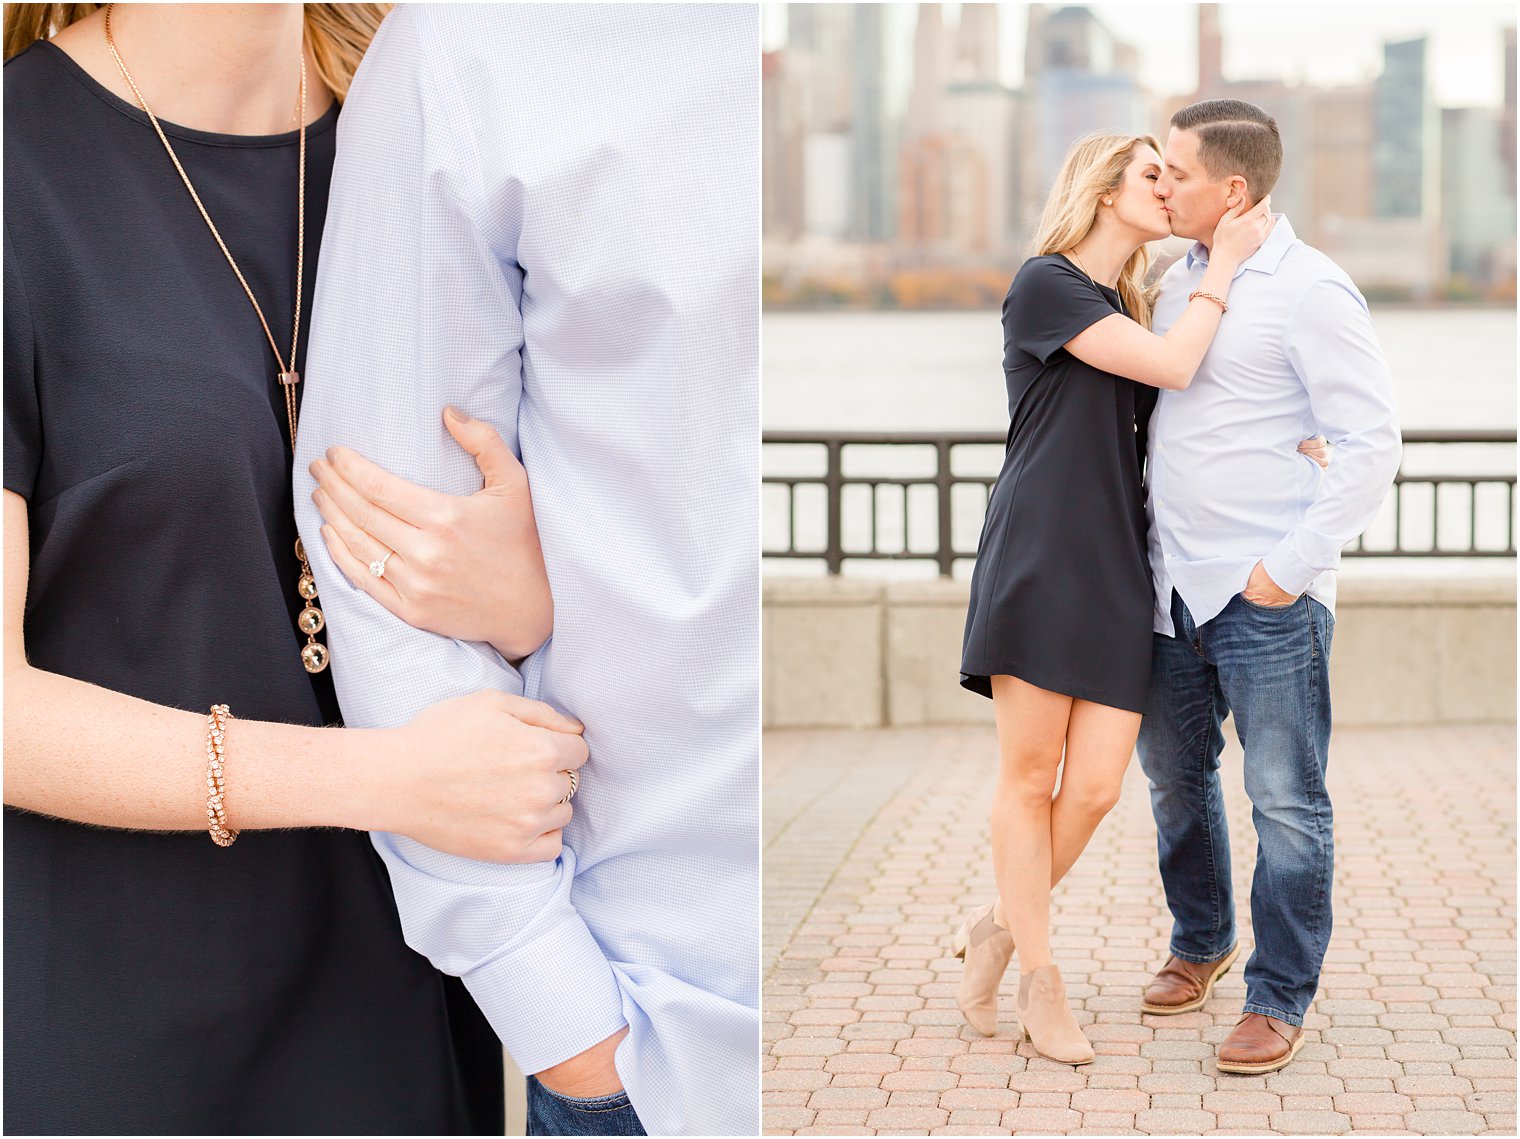 Engagement photos with NYC skyline in the background